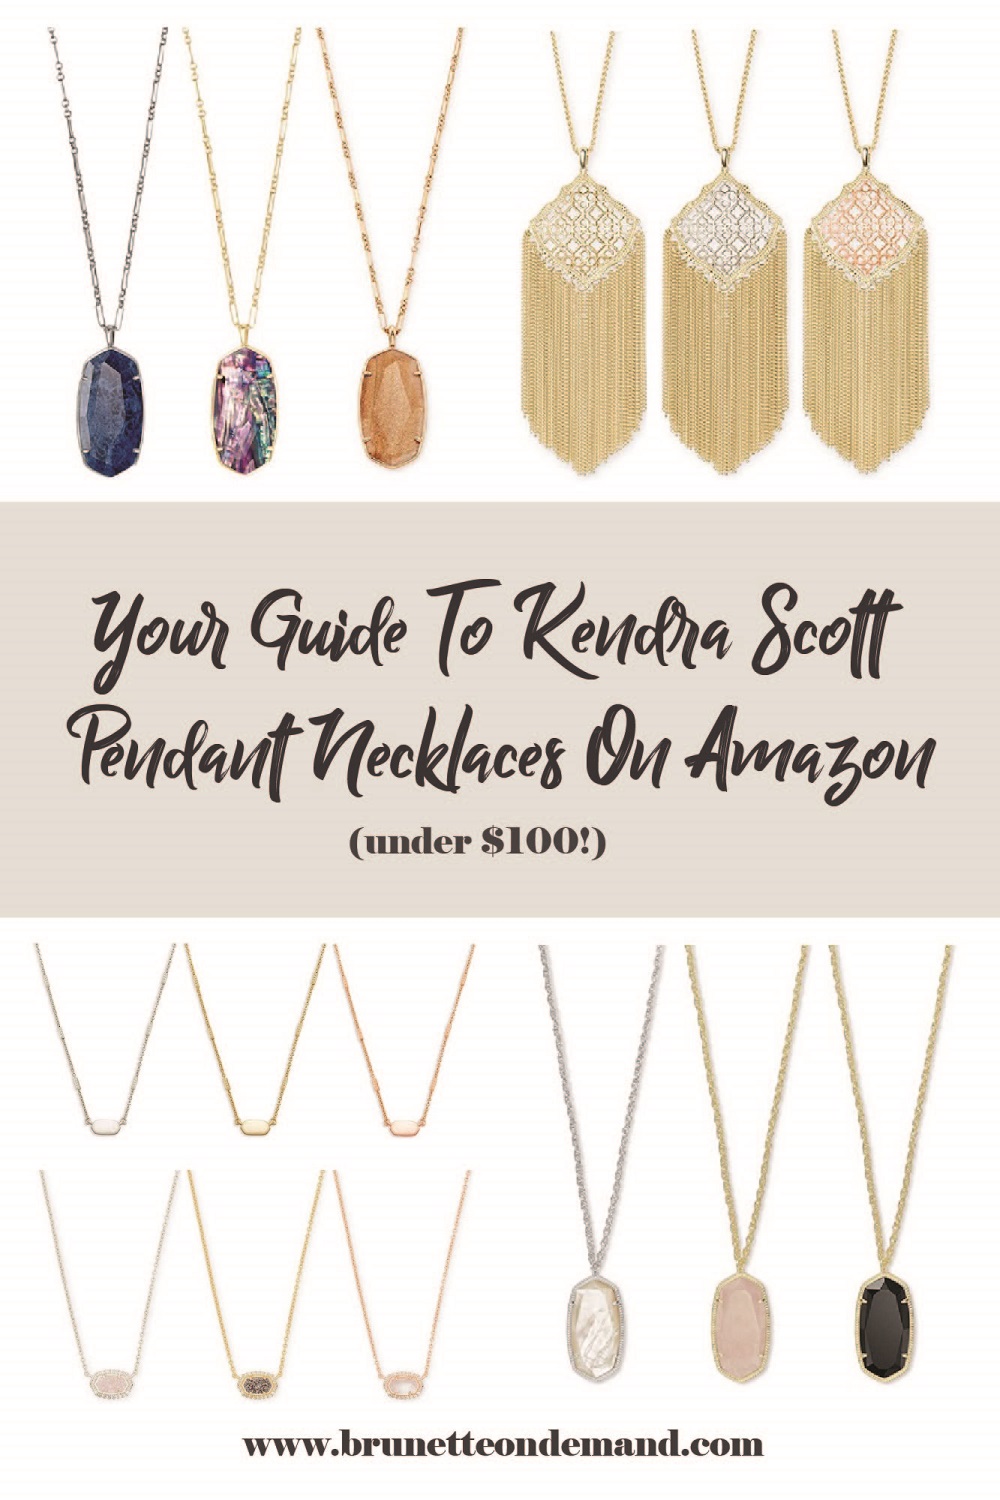 Your Guide To Kendra Scott Pendant Necklaces Under $100